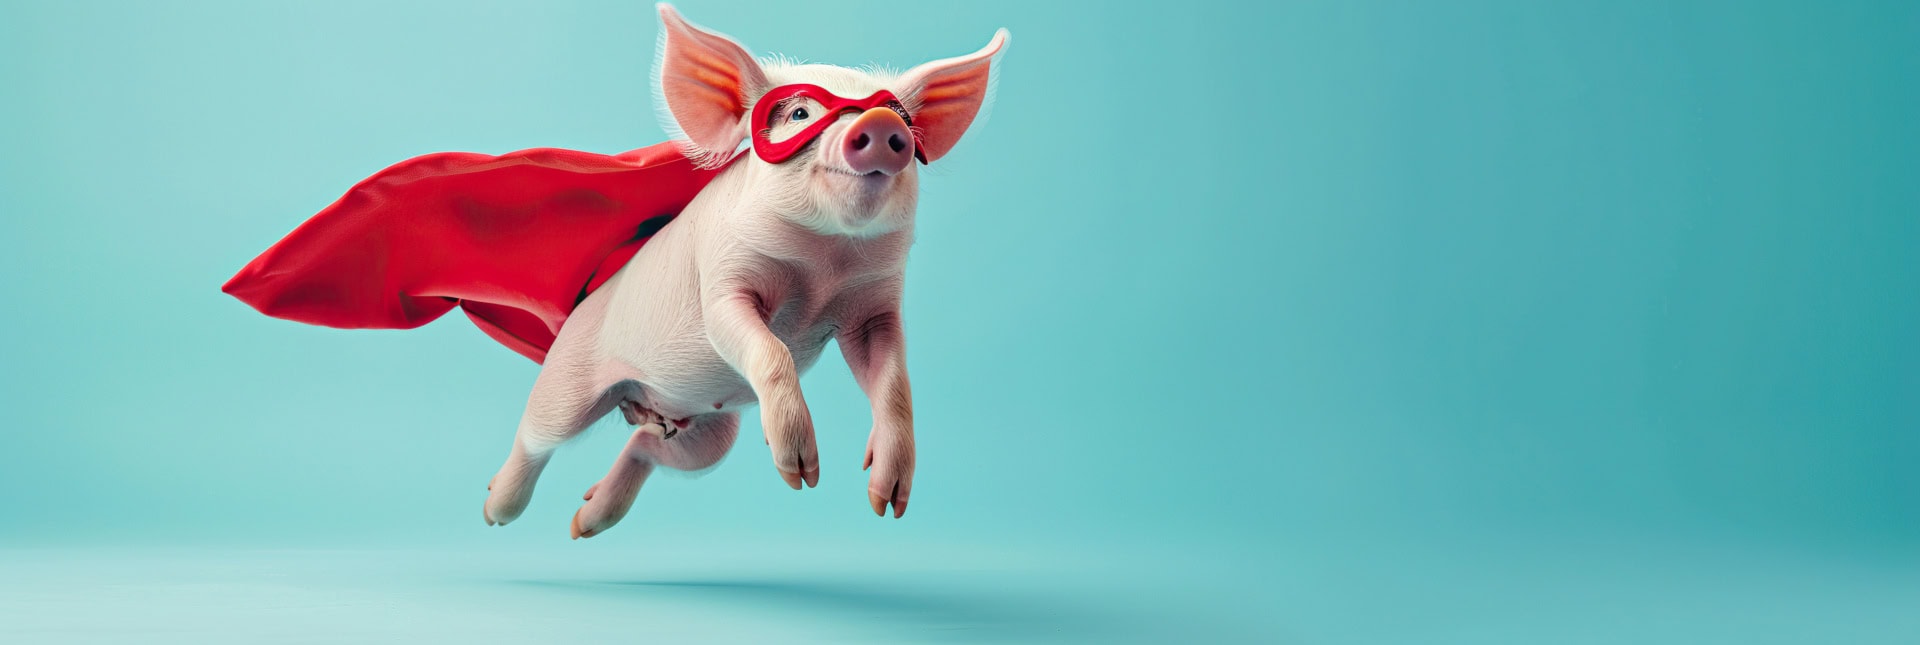 Superhero pig, Cute pink pig with a red cloak and mask jumping and flying on light blue background with copy space.